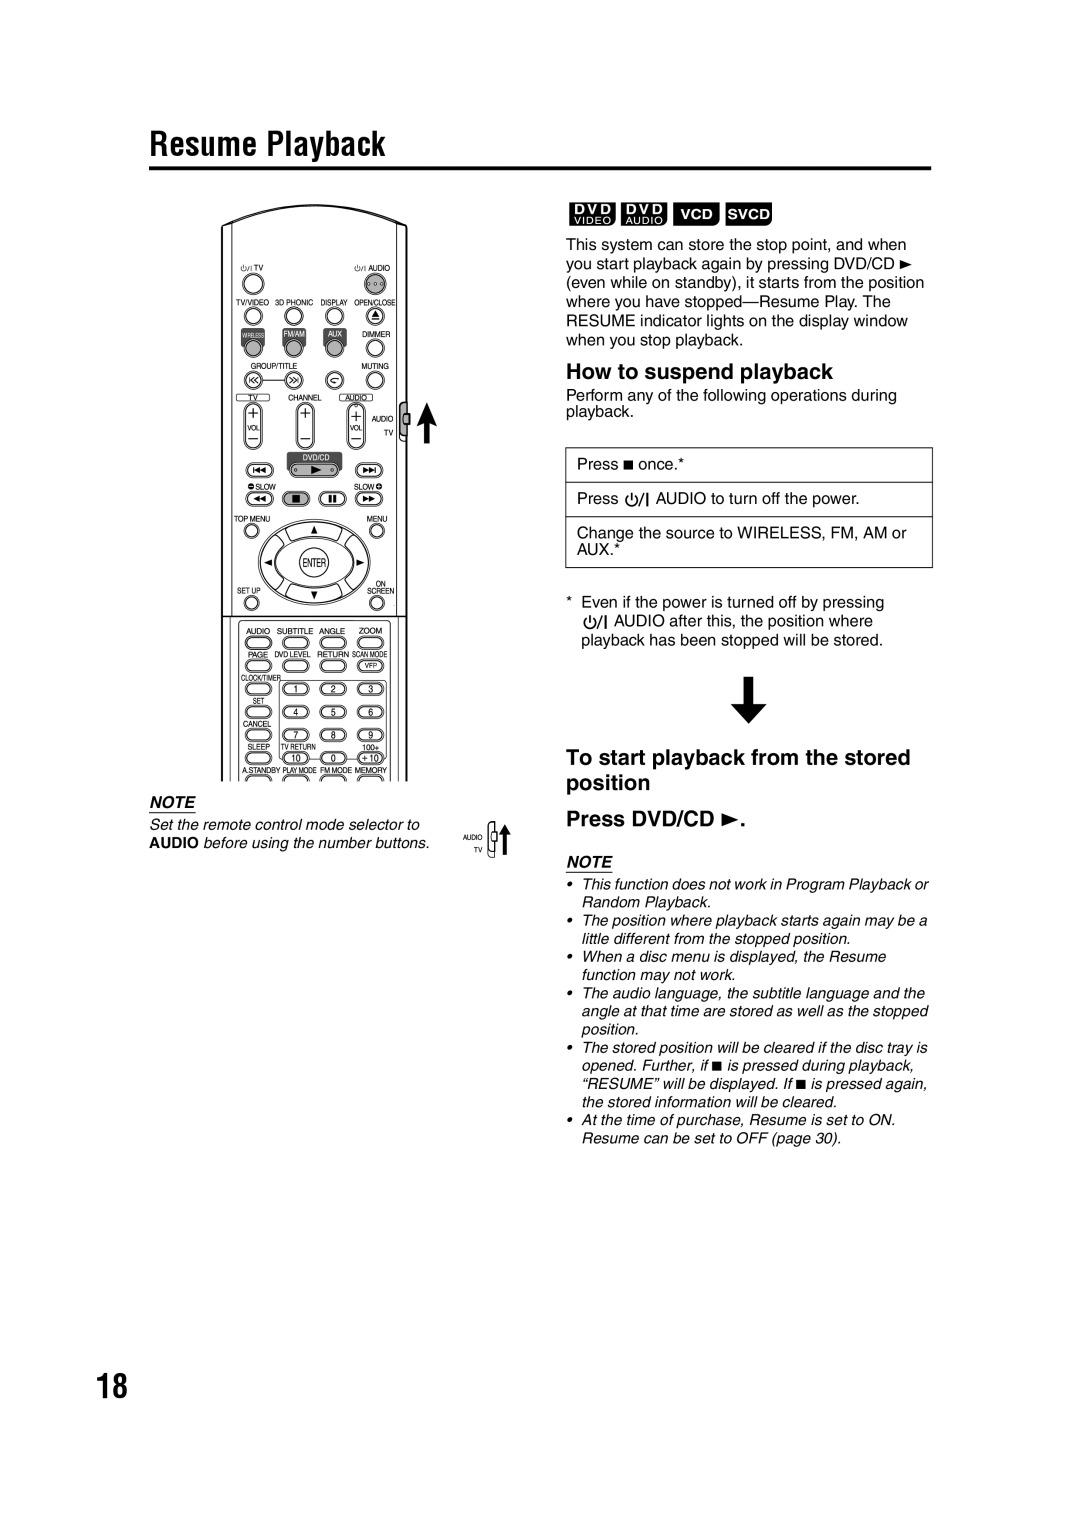 JVC GVT0144-005A manual Resume Playback, How to suspend playback, To start playback from the stored position, Press DVD/CD 